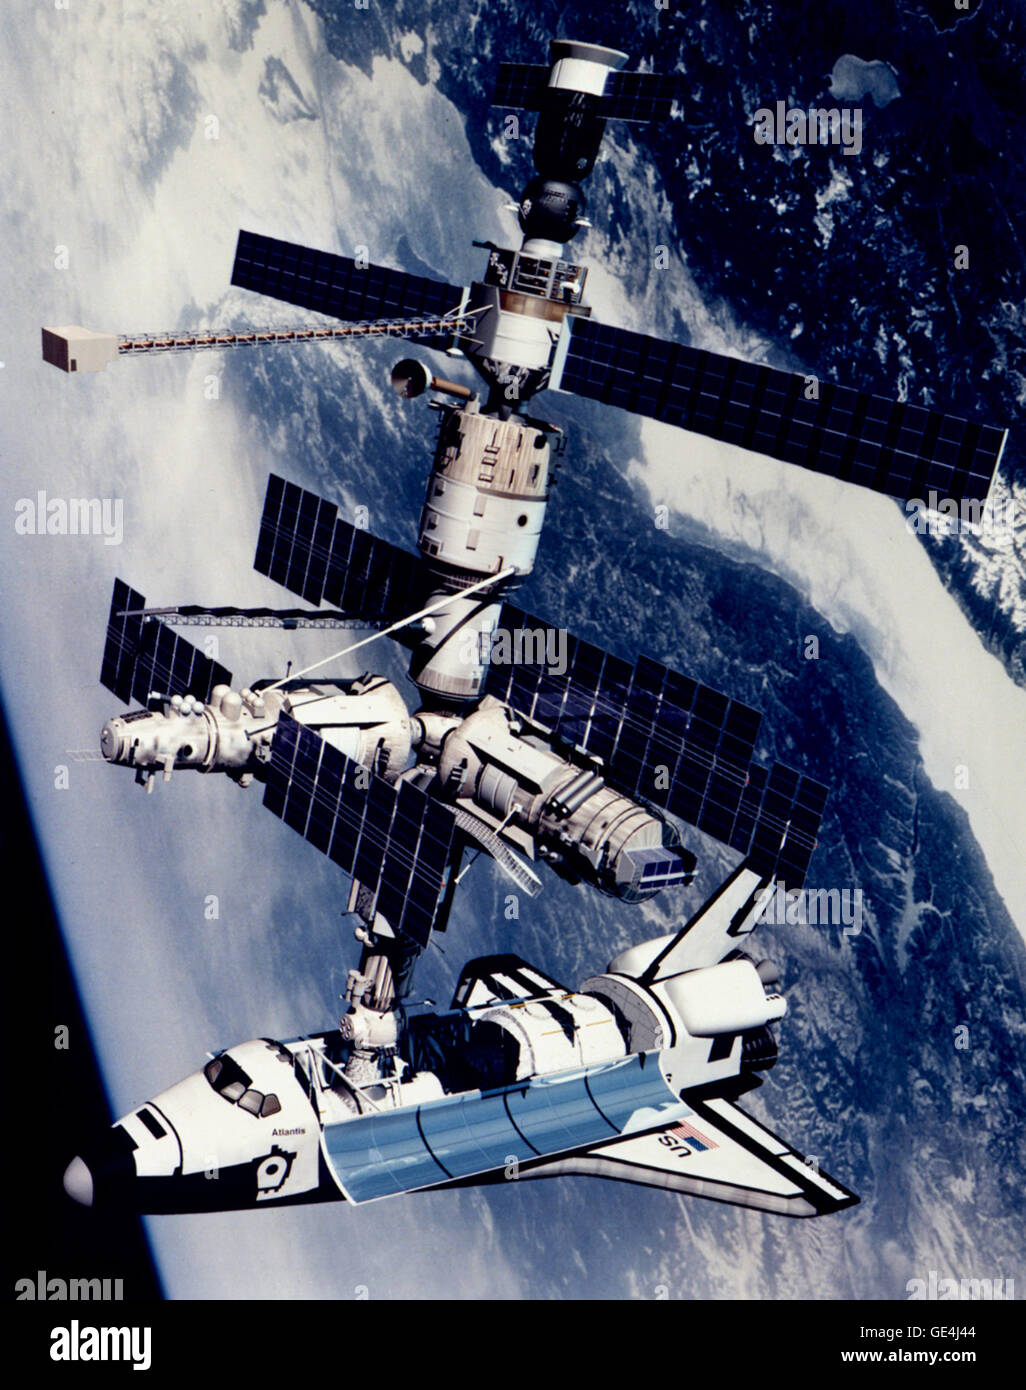 Shown is a technical rendition of the Space Shuttle Atlantis docked to the Kristall module of the Russian Mir Space Station. The configuration shown is that of STS-71/Mir Expedition 18, a joint U.S. Russian mission completed in June 1995. The Space Shuttle/Mir combination, which was the largest space platform ever assembled, is shown overflying the Lake Baikal region of Russia. The Space Shuttle Atlantis appears in a new configuration for the STS-71 flight. The Russian developed Androgynous Peripheral Docking System (APDS) is used to link the Orbiter to the Kristall module. The APDS is mounted Stock Photo